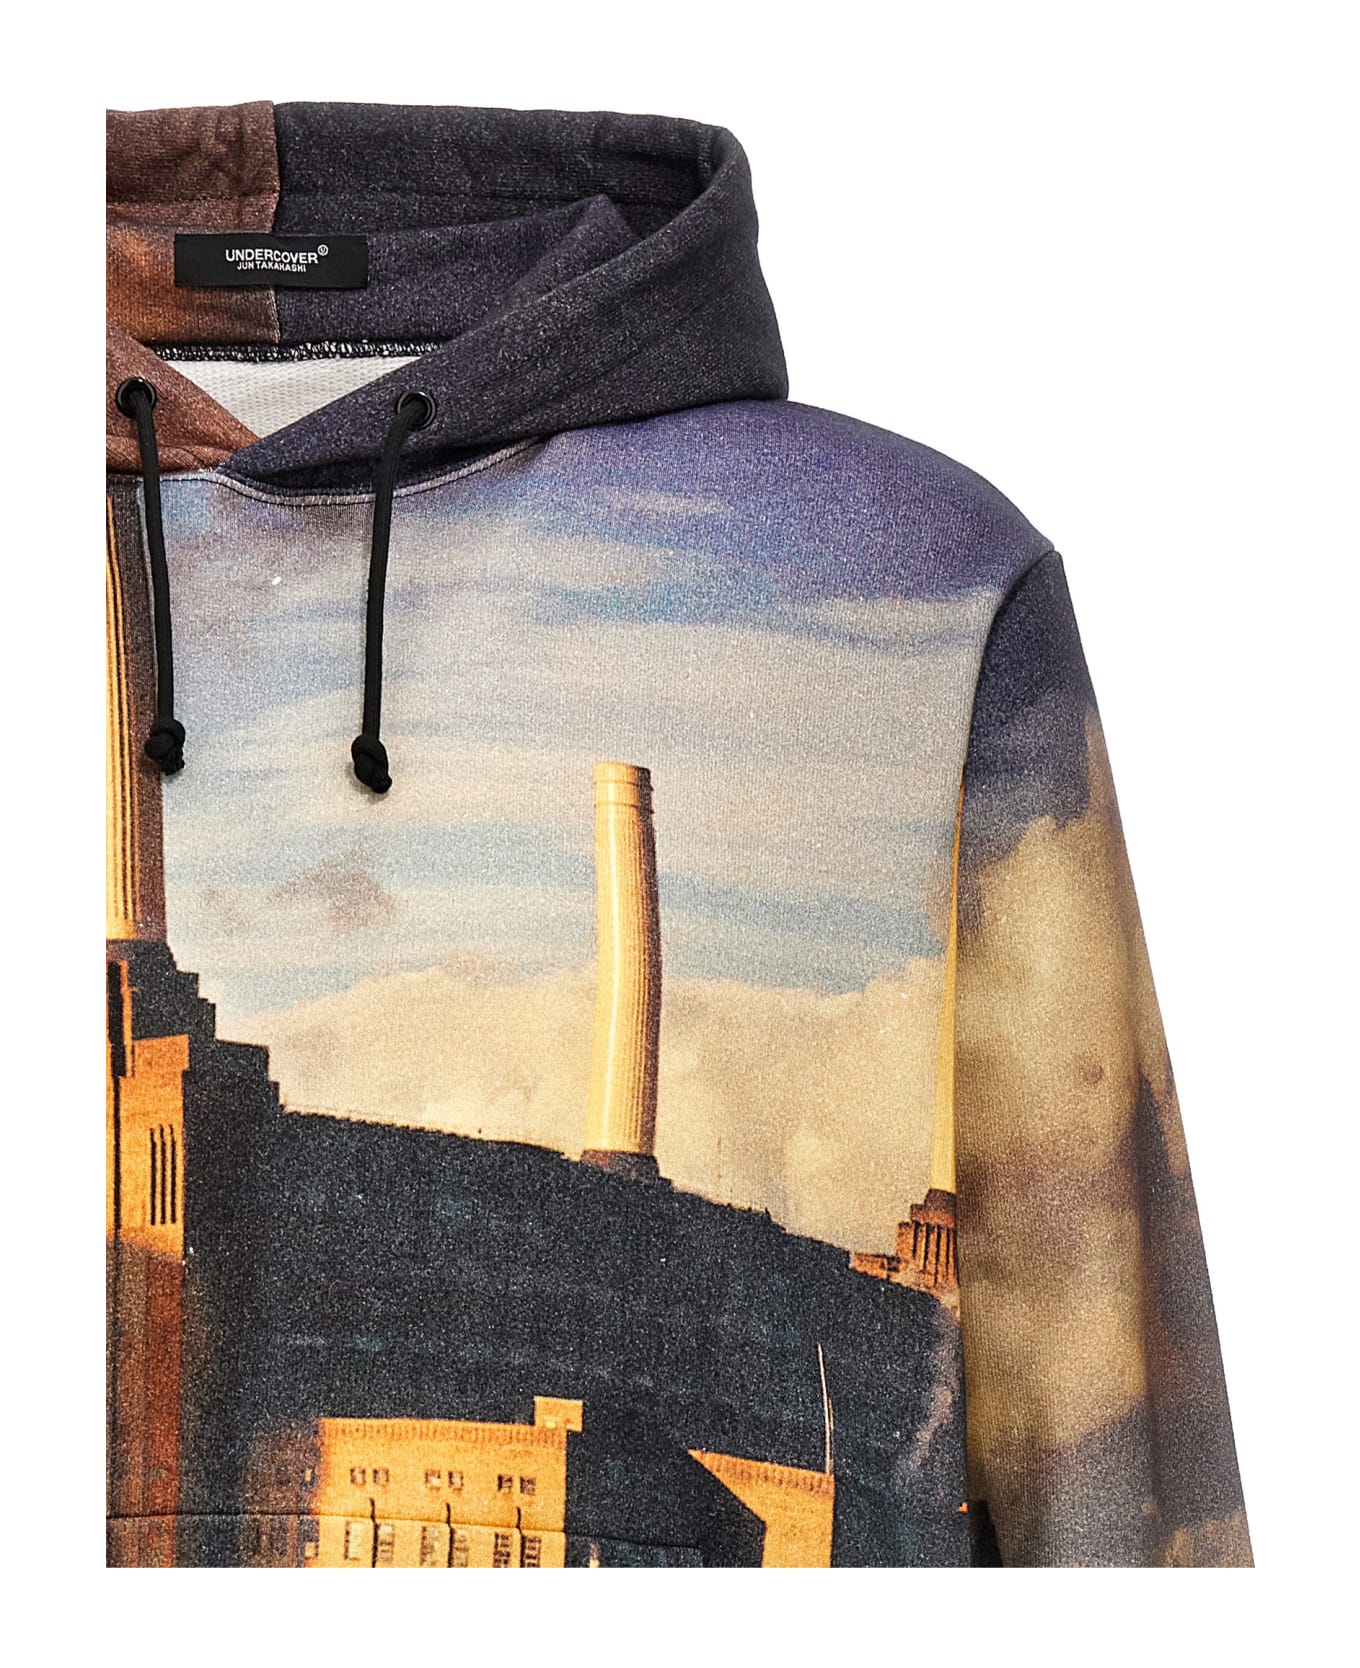 Undercover Jun Takahashi Undercover X Pink Floyd Hoodie - Multicolor